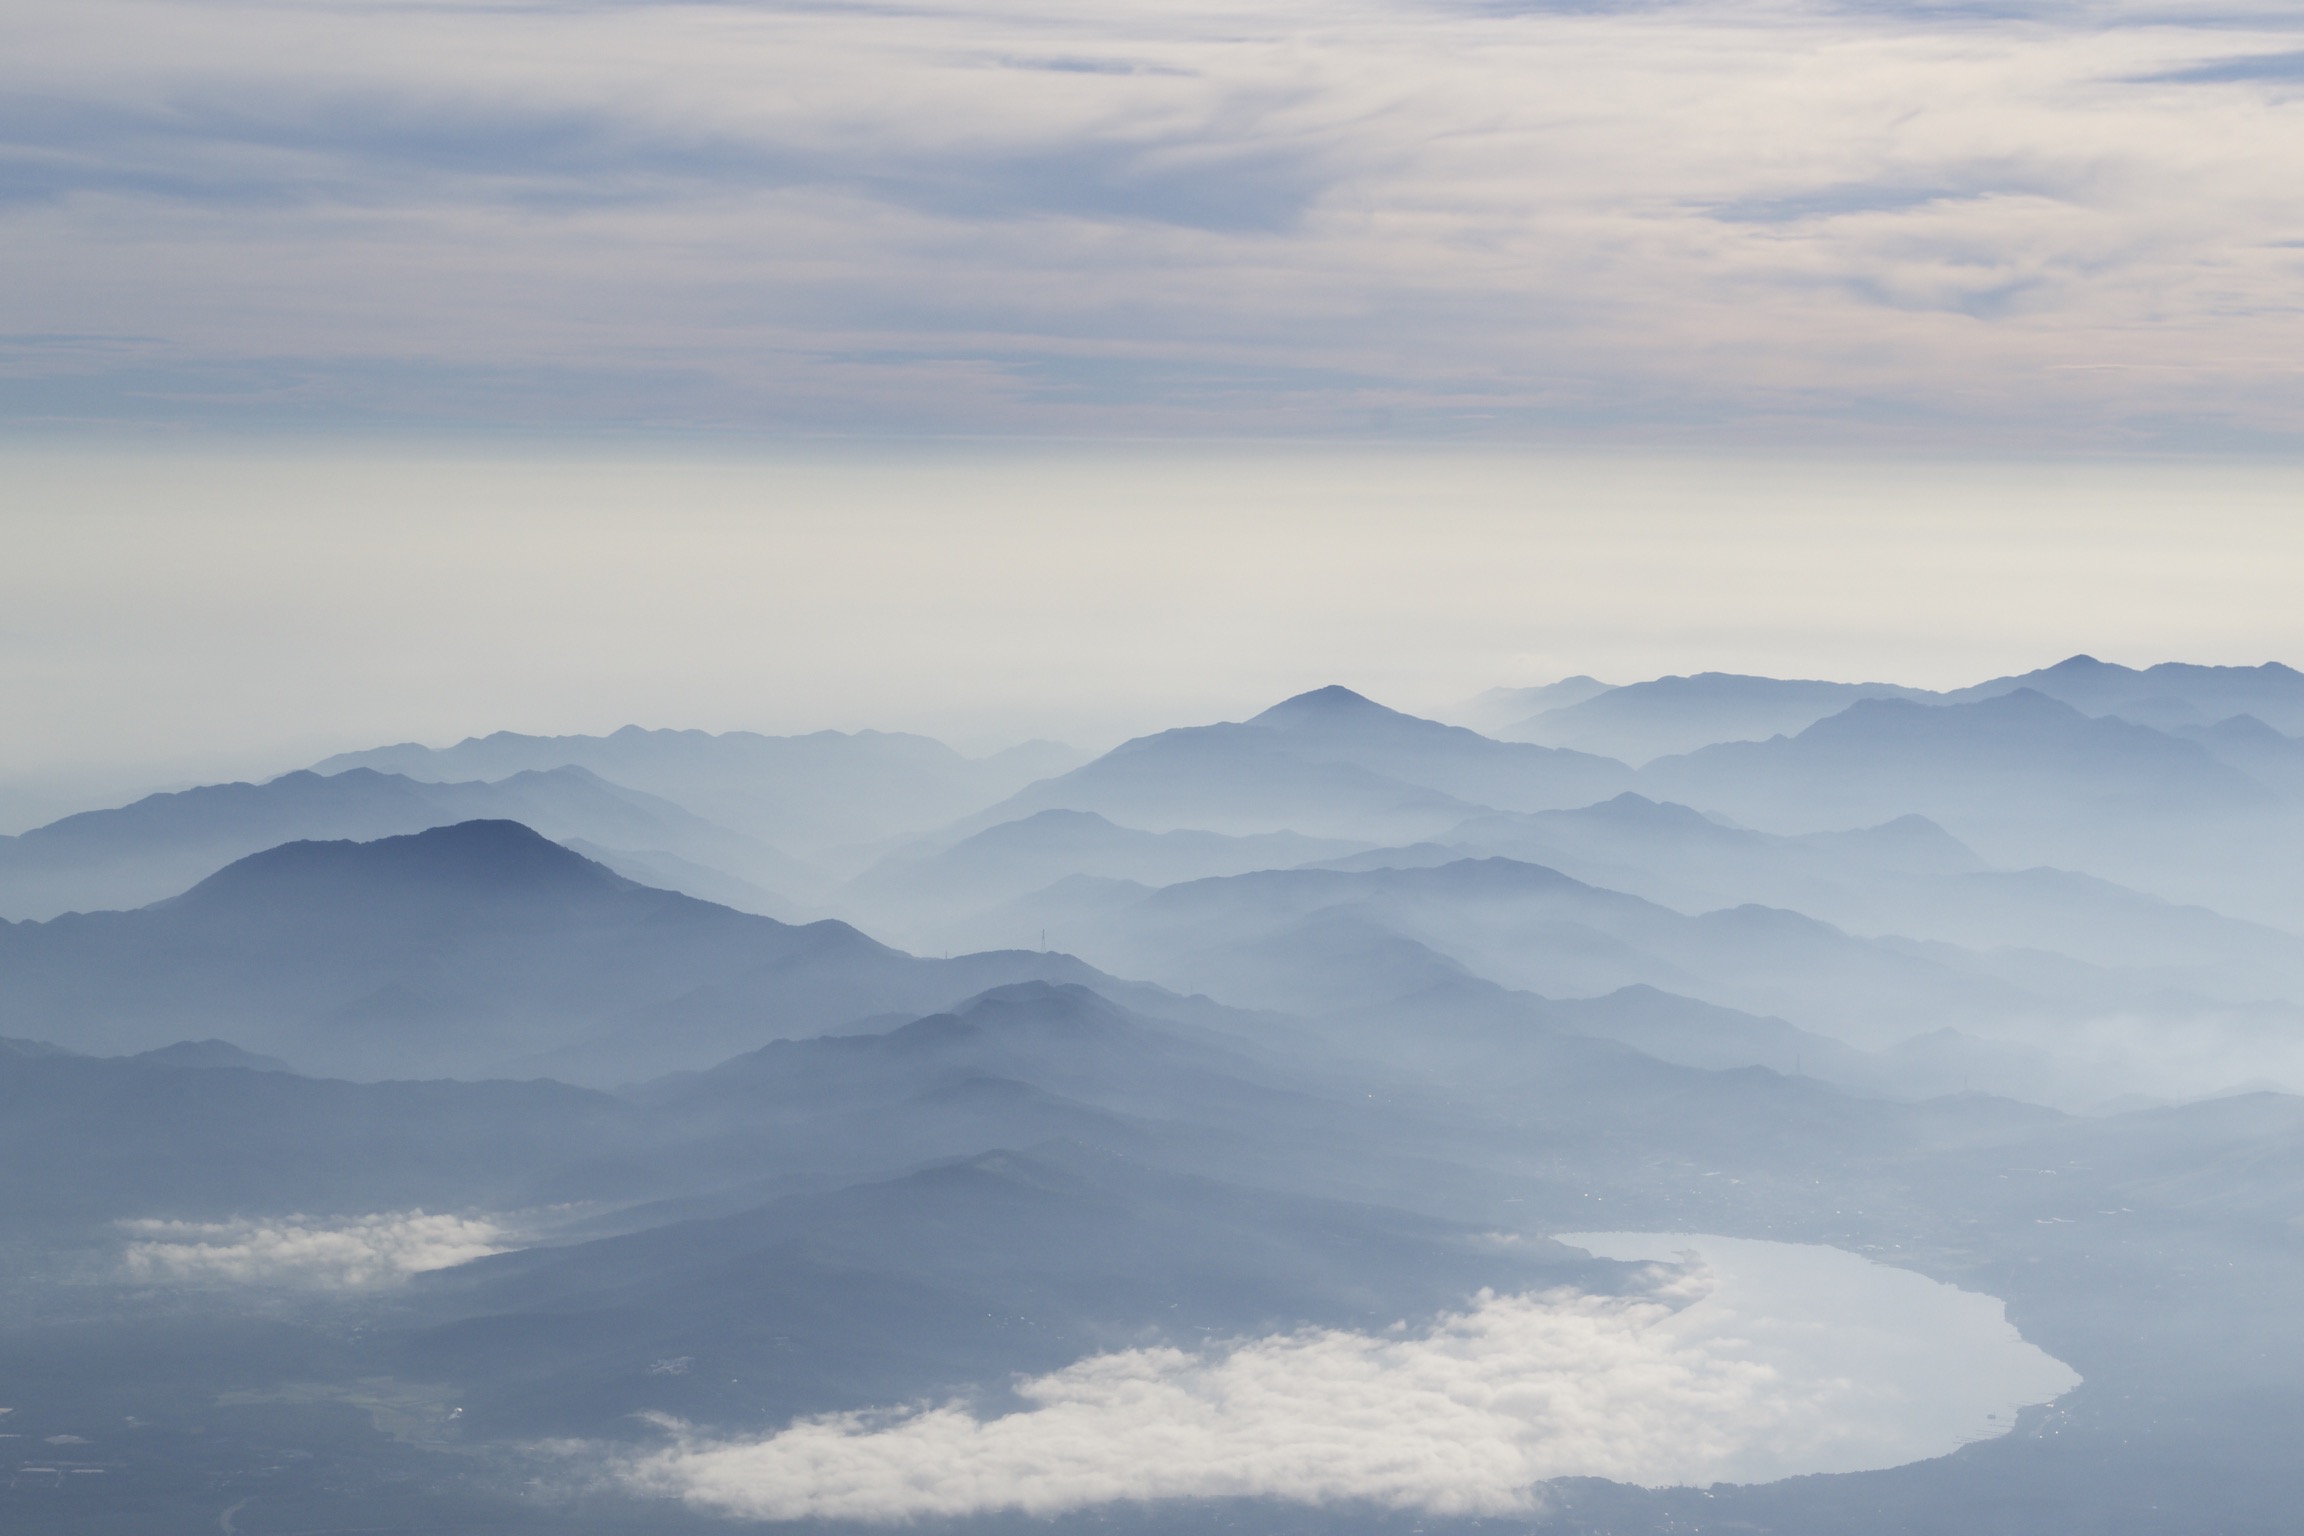 Silhouettes of mountains beneath a cloudy, pastel blue sky.